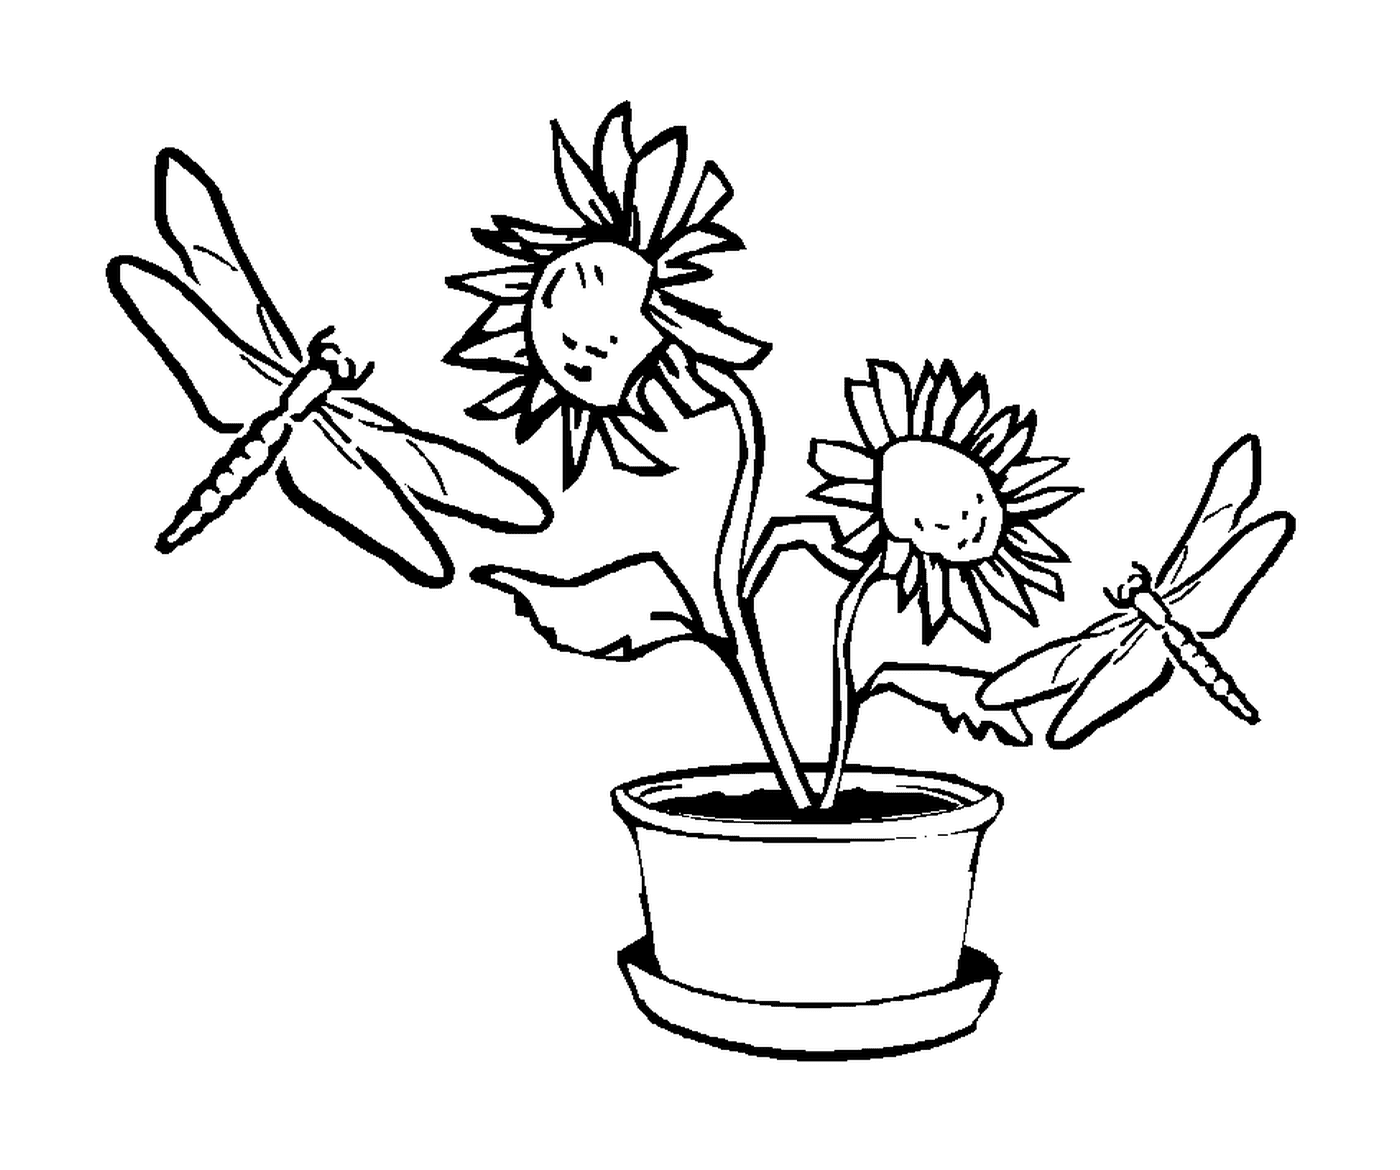  Two dragonflies flying around a flowerpot 